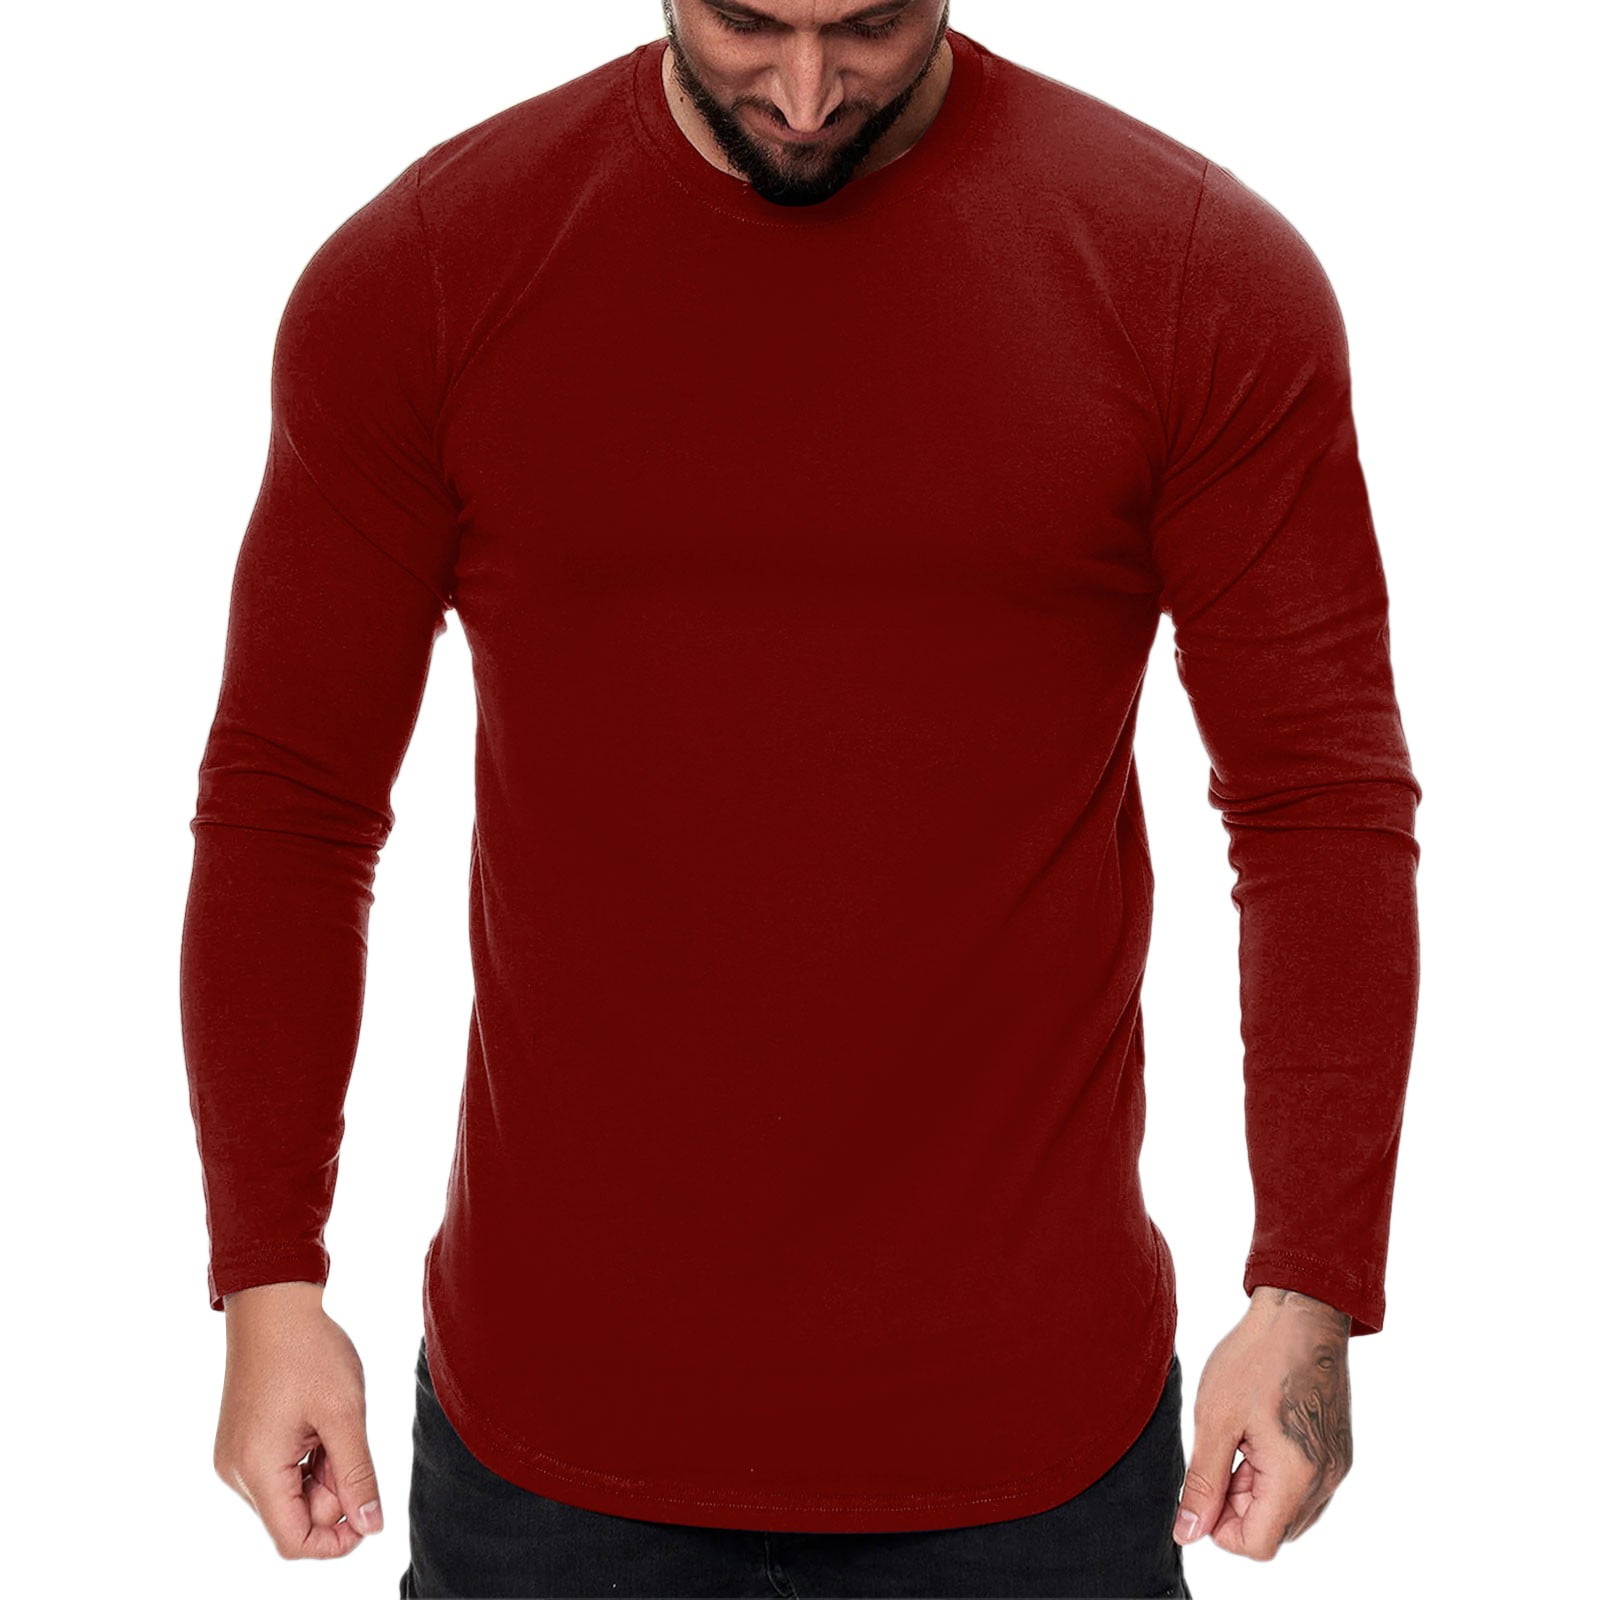 Yubnlvae Mens Fashion Casual Sports Fitness Outdoor Curved Hem Solid Color  Round Neck T Shirt Long Sleeve Top